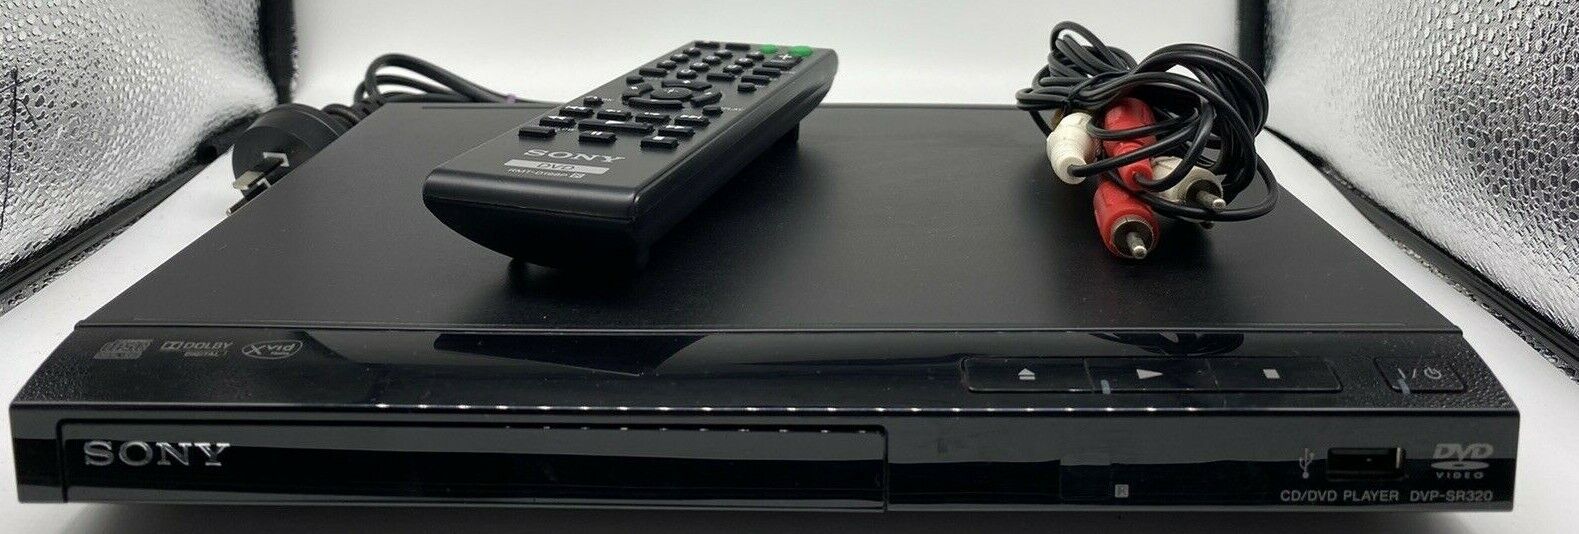 Sony Small Black Compact DVD Player with Remote | DVP-SR320